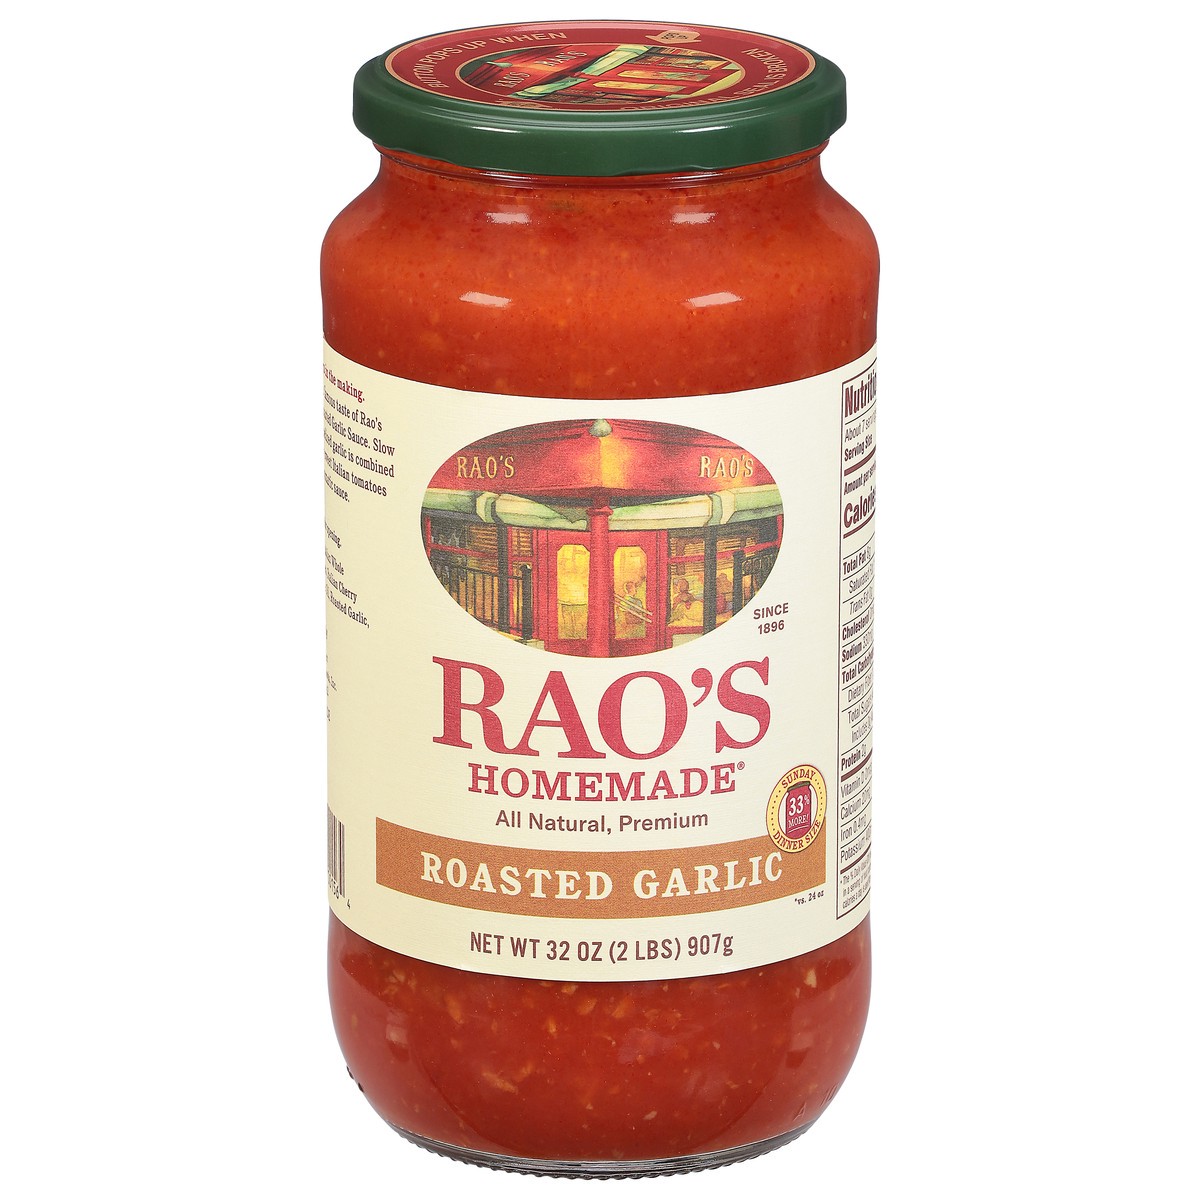 slide 1 of 9, Rao's Homemade Tomato Sauce | Roasted Garlic | 32 oz | Versatile Pasta Sauce | Carb Conscious, Keto Friendly | All Natural,  Premium Quality | Made with Sweet Italian Tomatoes and Caramelized Garlic, 12 oz